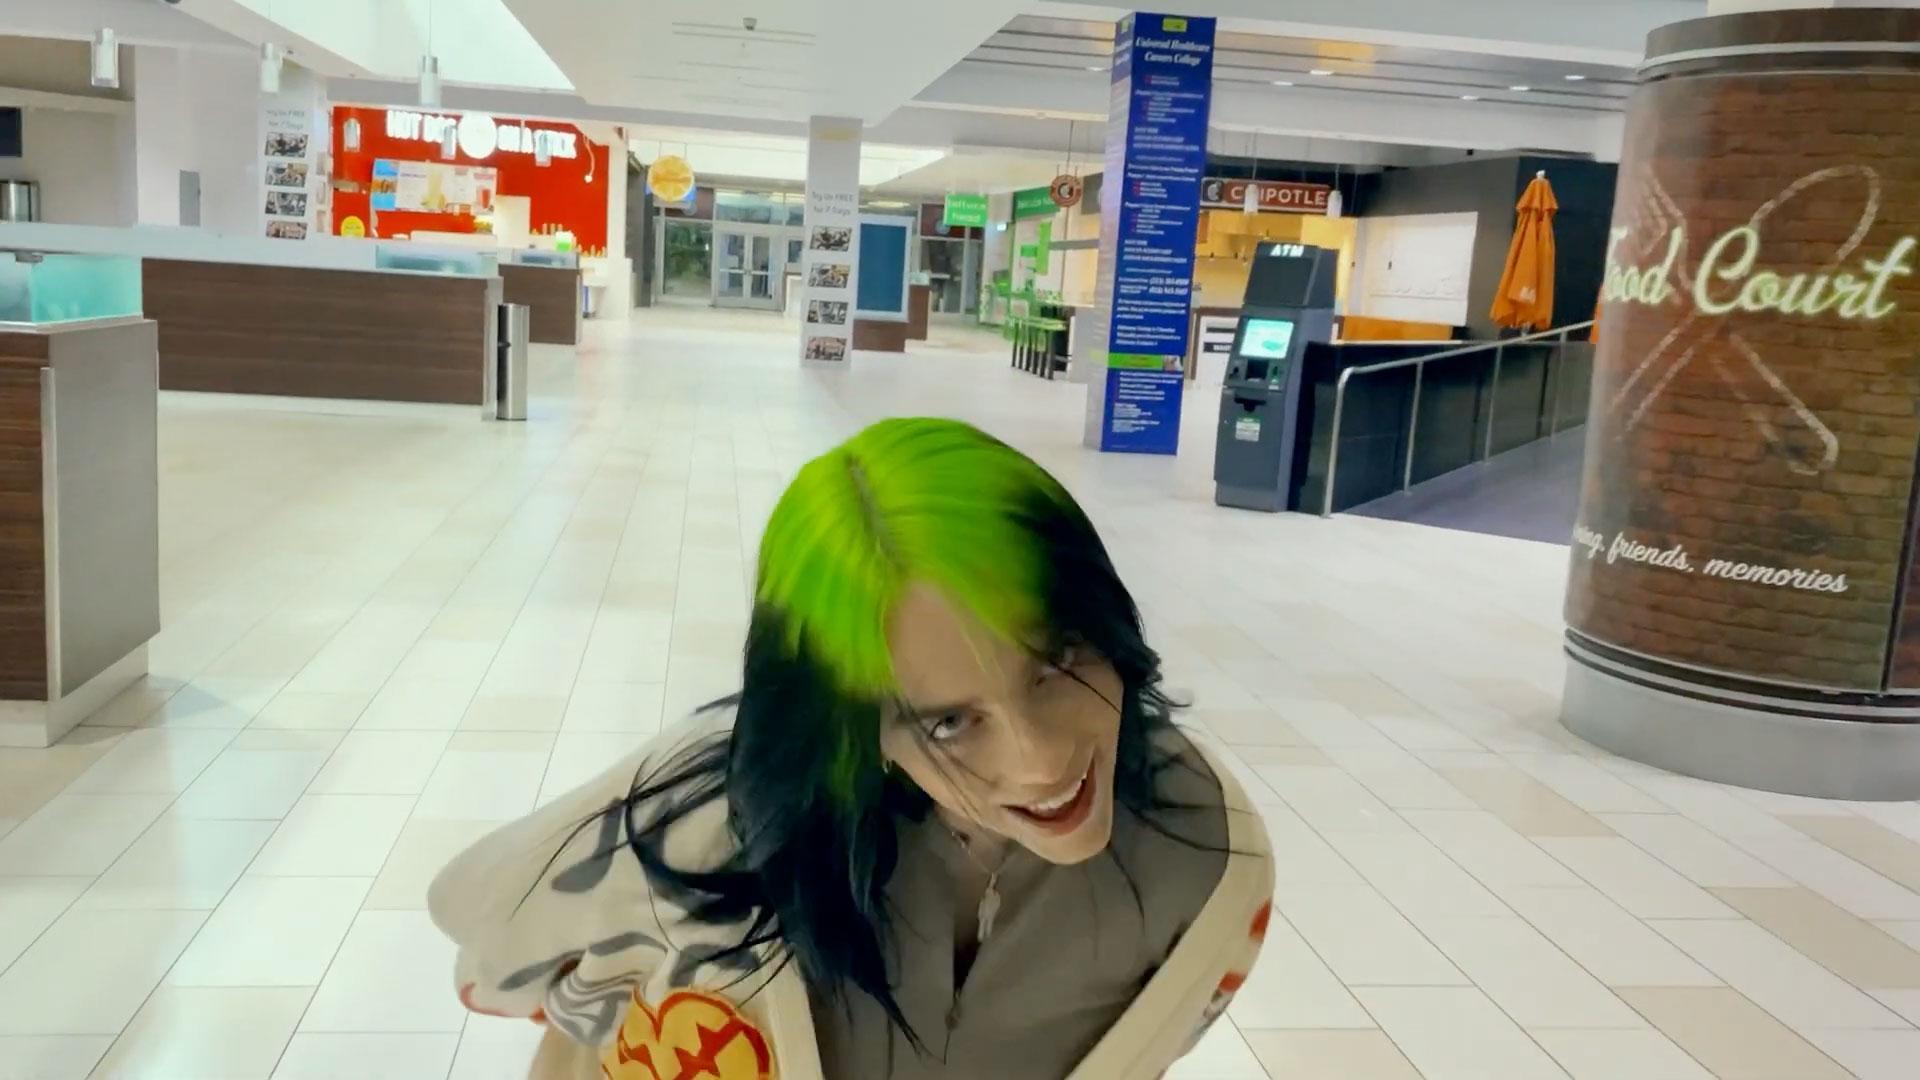 Billie Eilish: Therefore I Am (Music Video) (2020)